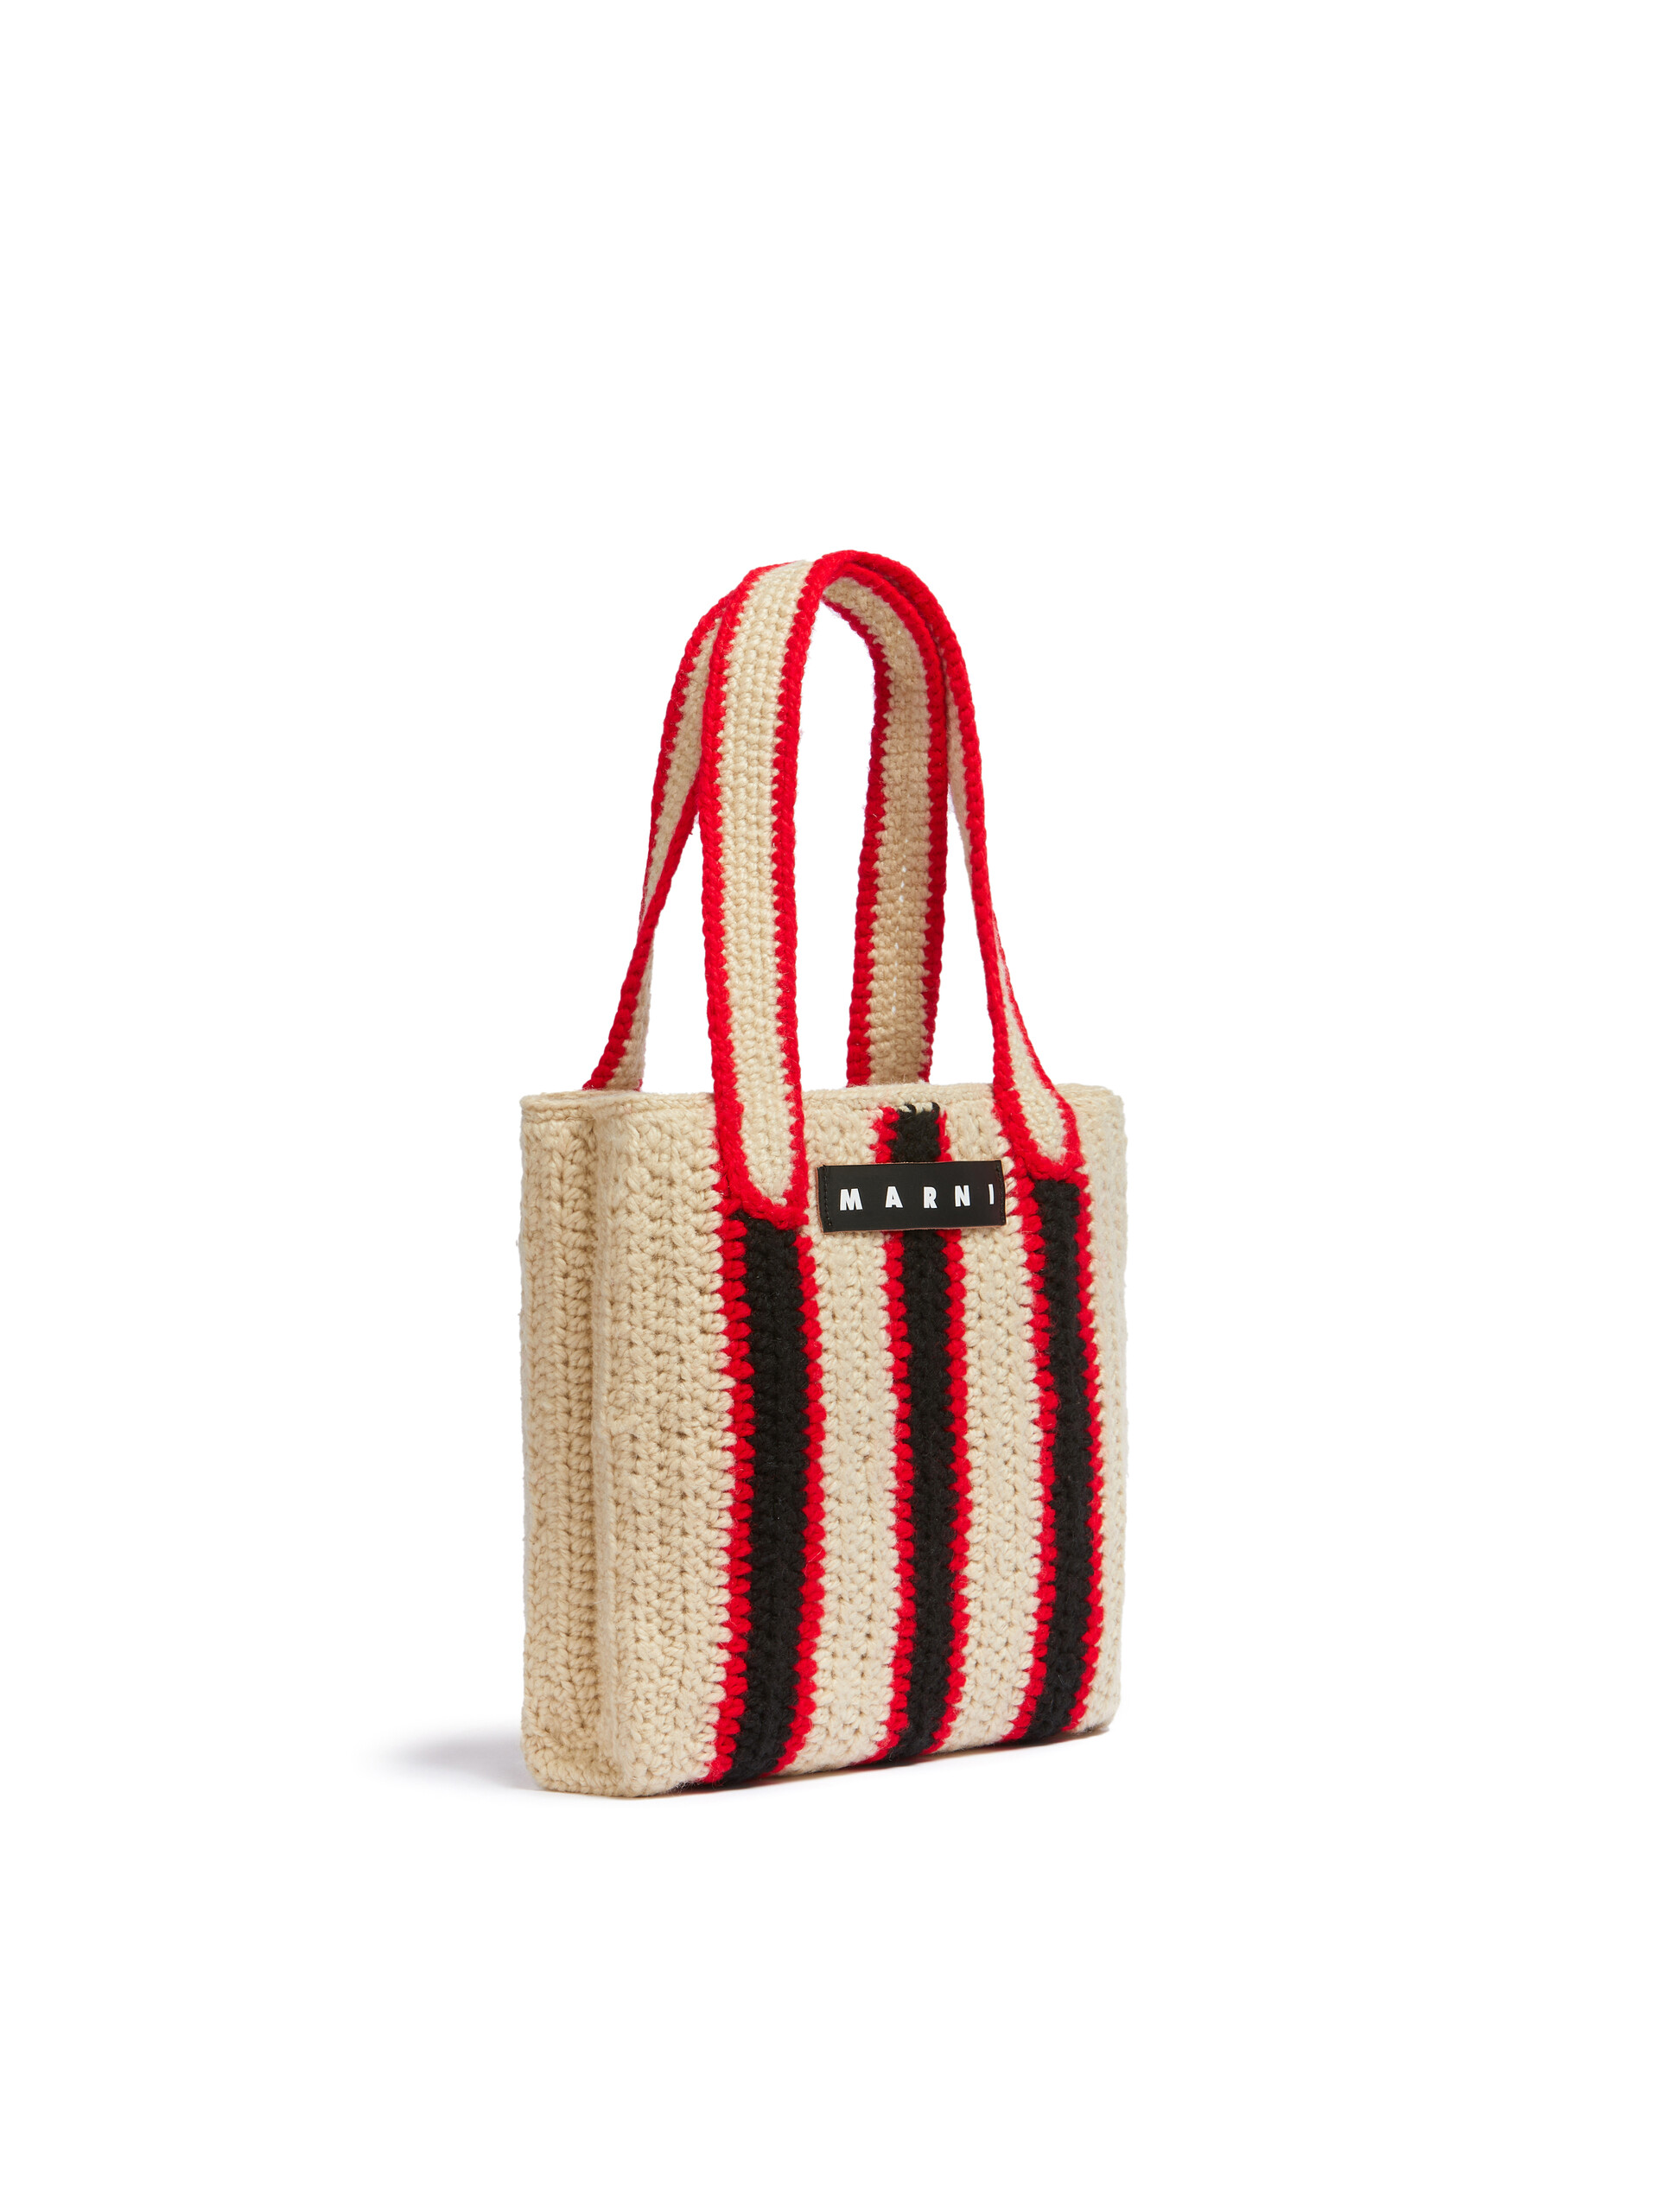 MARNI MARKET shopping bag in striped blue and red crochet - Shopping Bags - Image 2